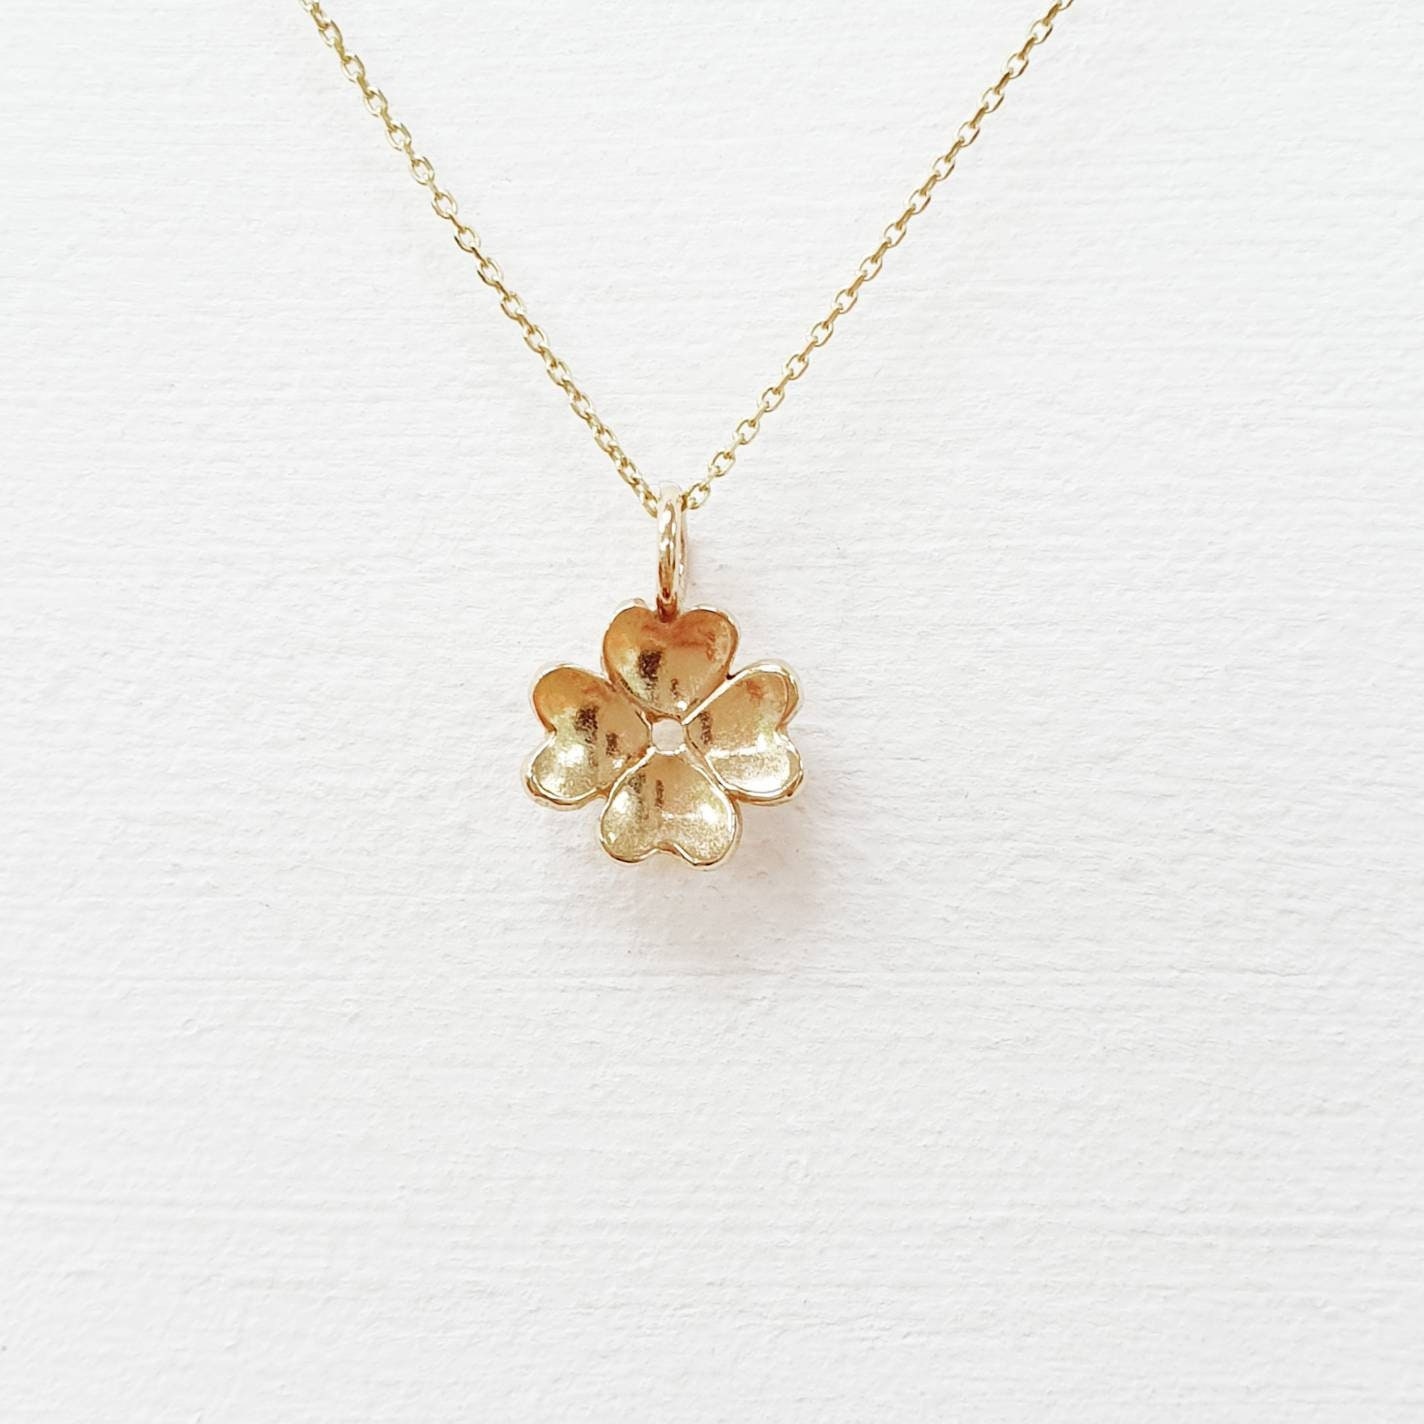 Gold Four-Leaf Clover Necklace - Solid 9Ct Gold Ecofriendly